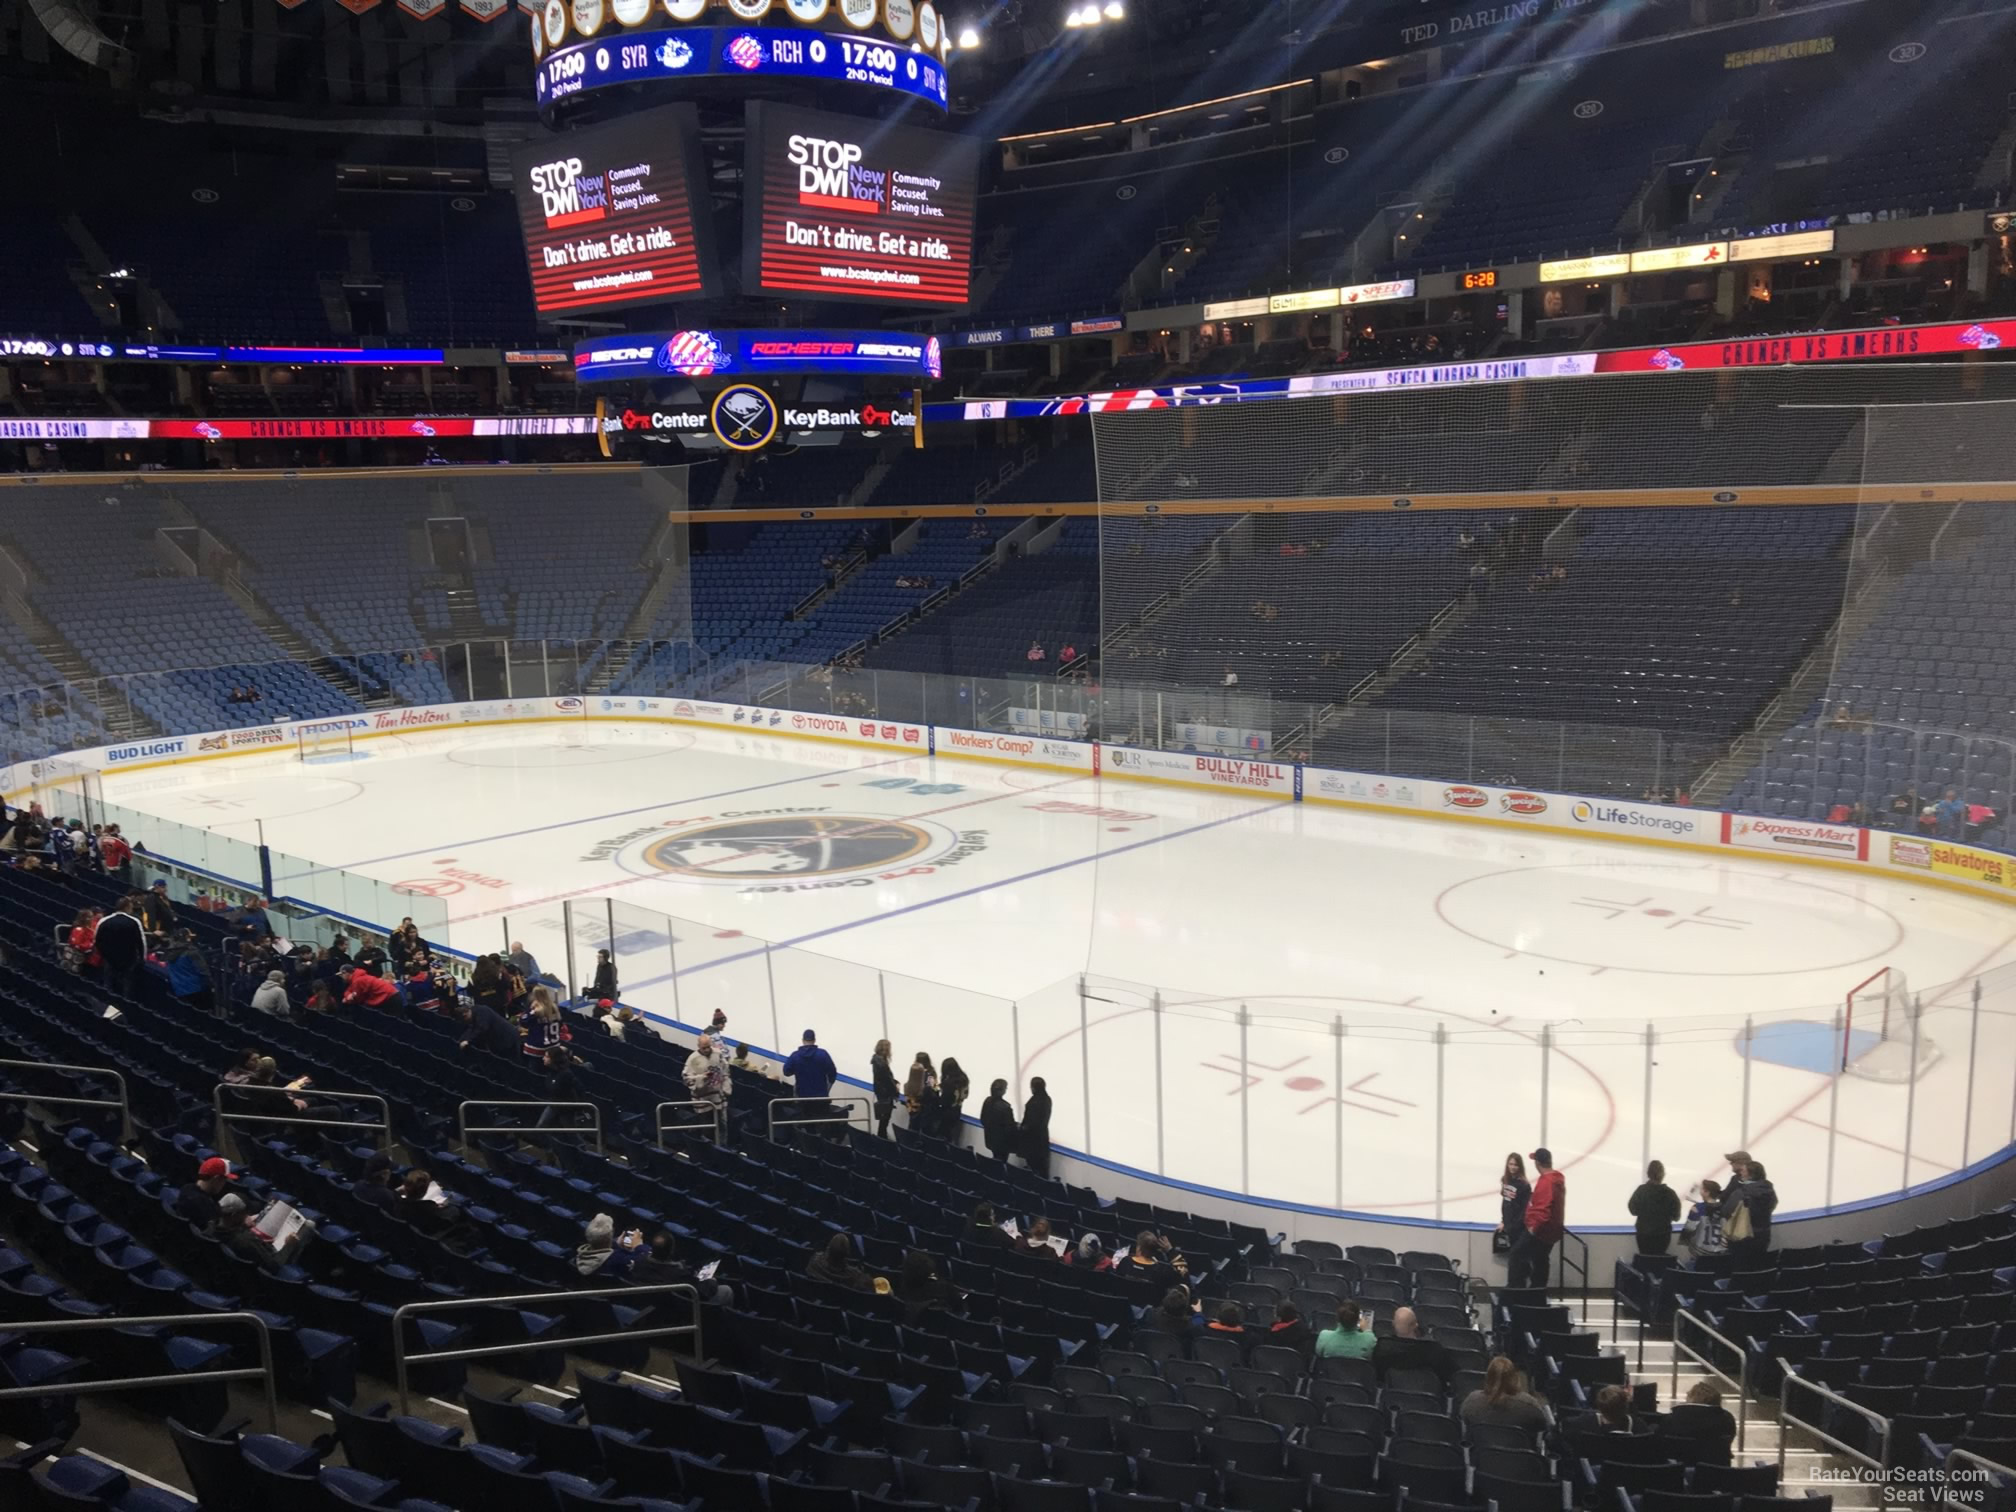 section 203, row 4 seat view  for hockey - keybank center